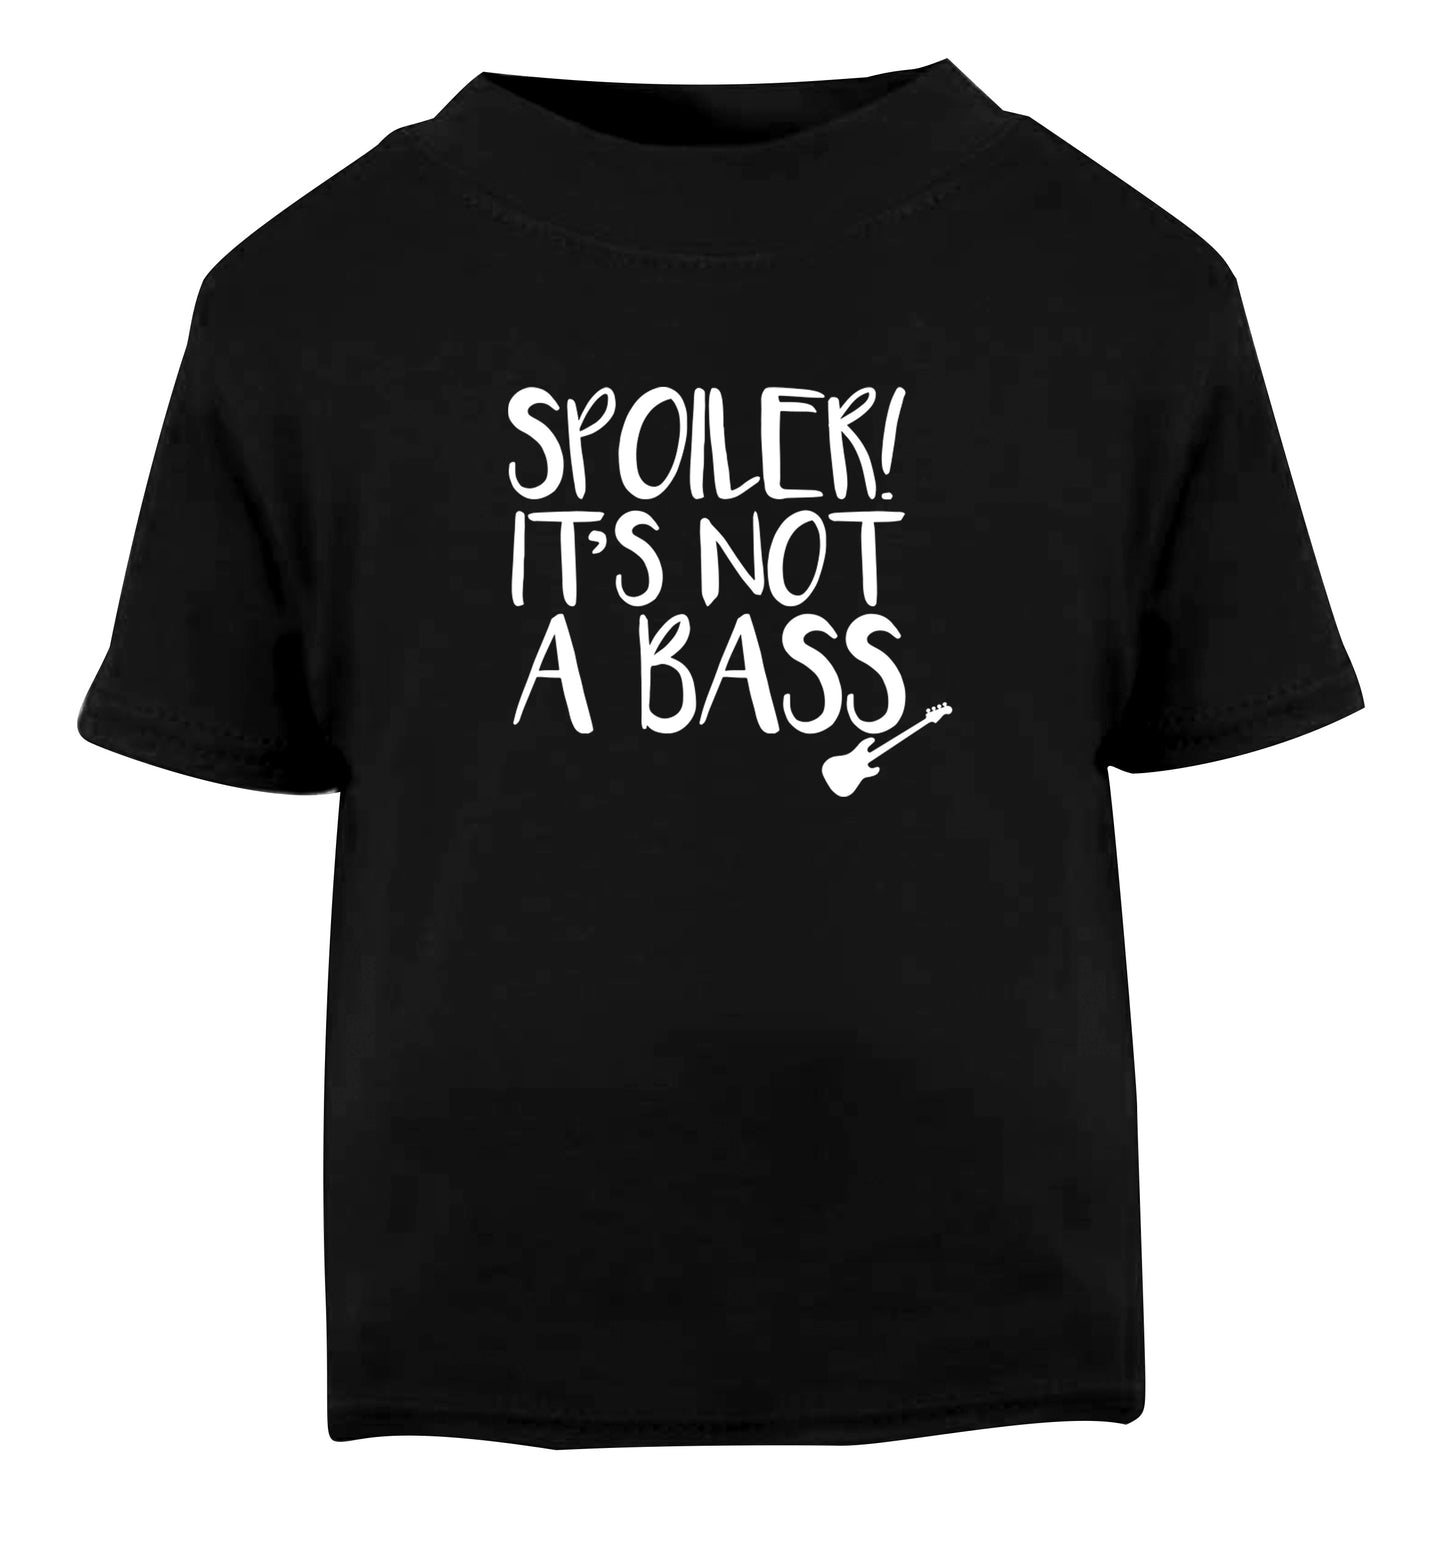 Spoiler it's not a bass Black Baby Toddler Tshirt 2 years